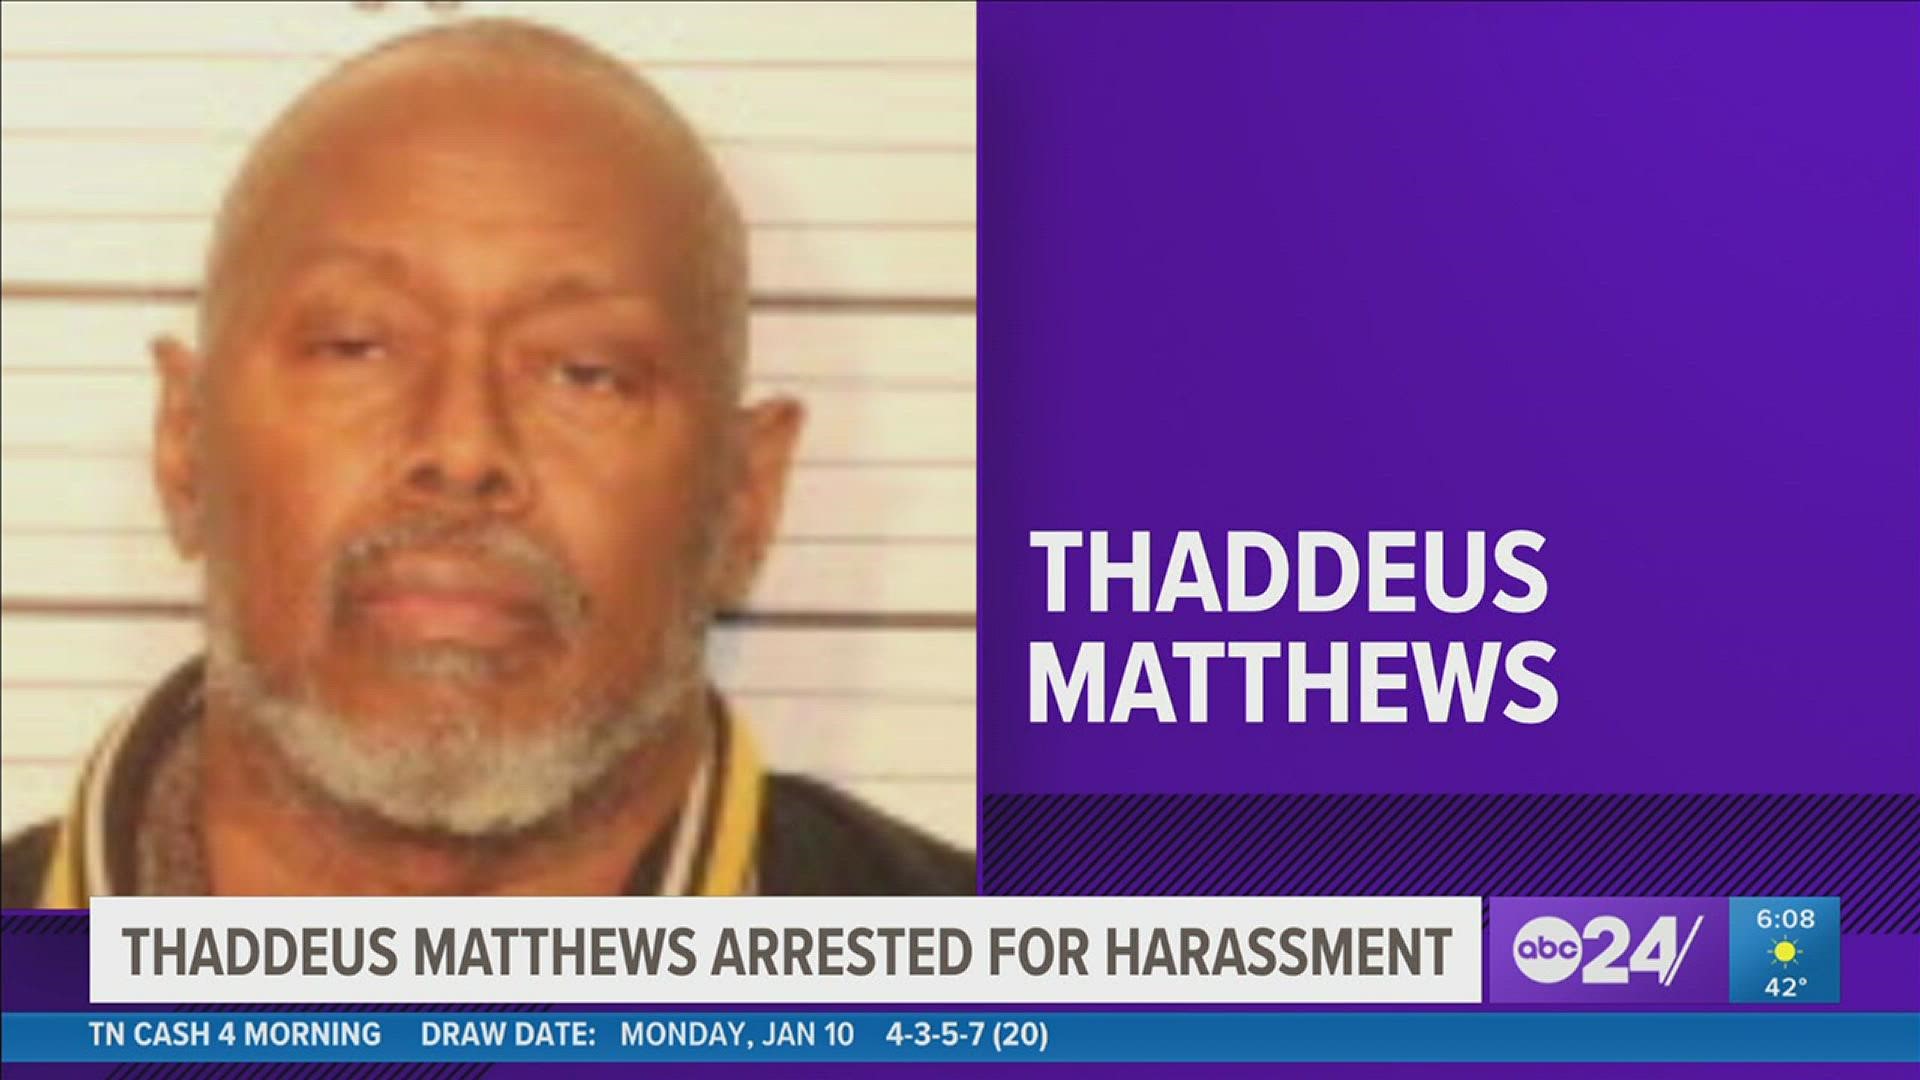 Matthews is facing charges of harassment and violating orders of protection.